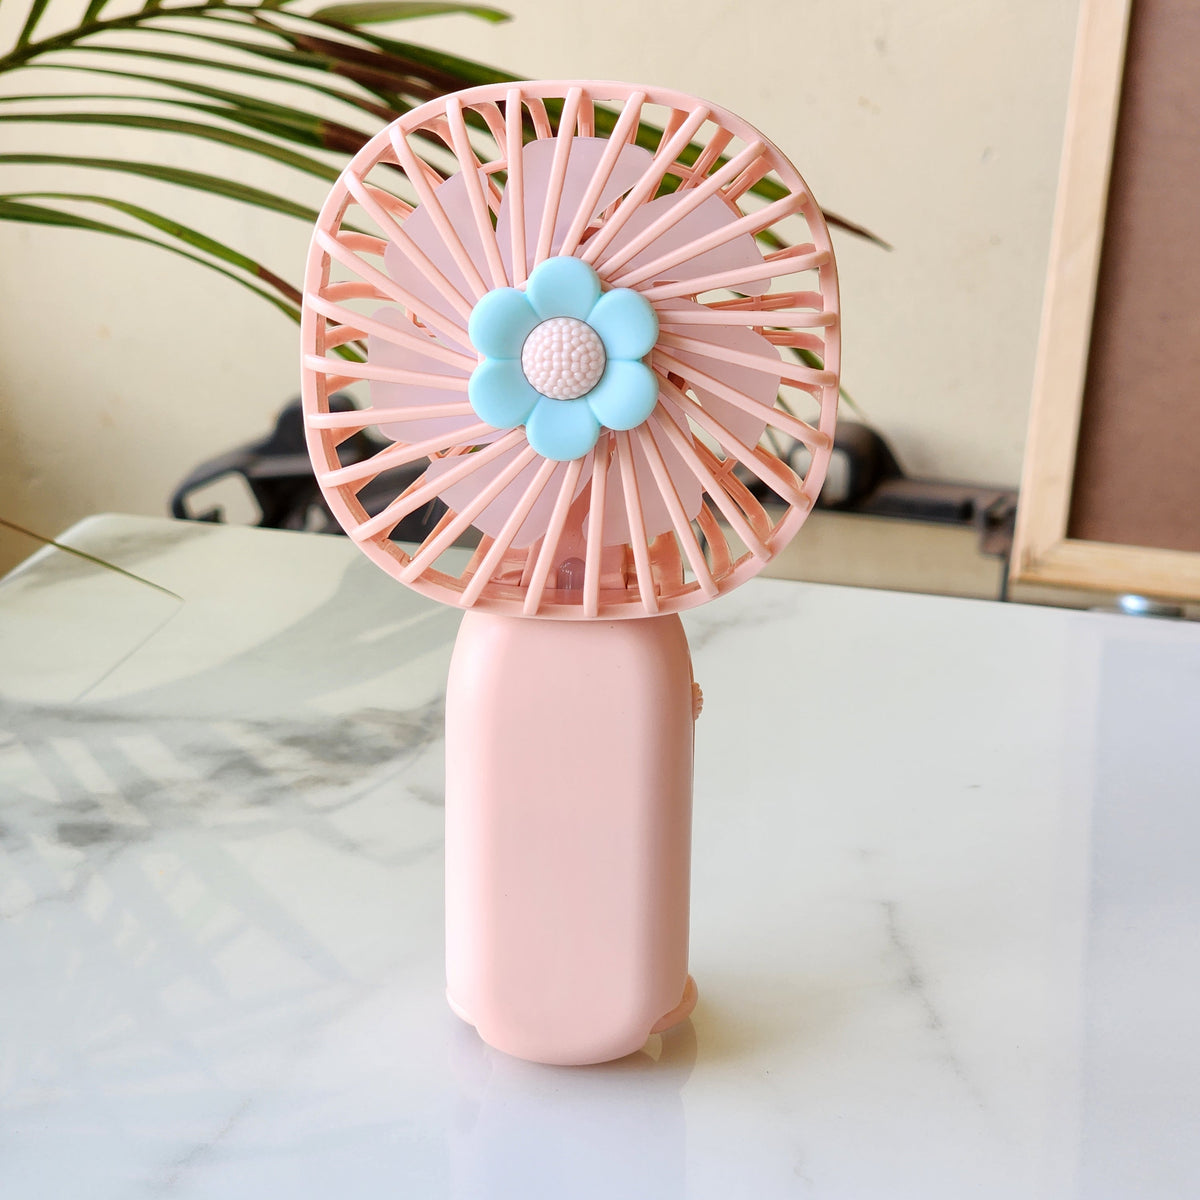 Portable flower Fan with ring stand